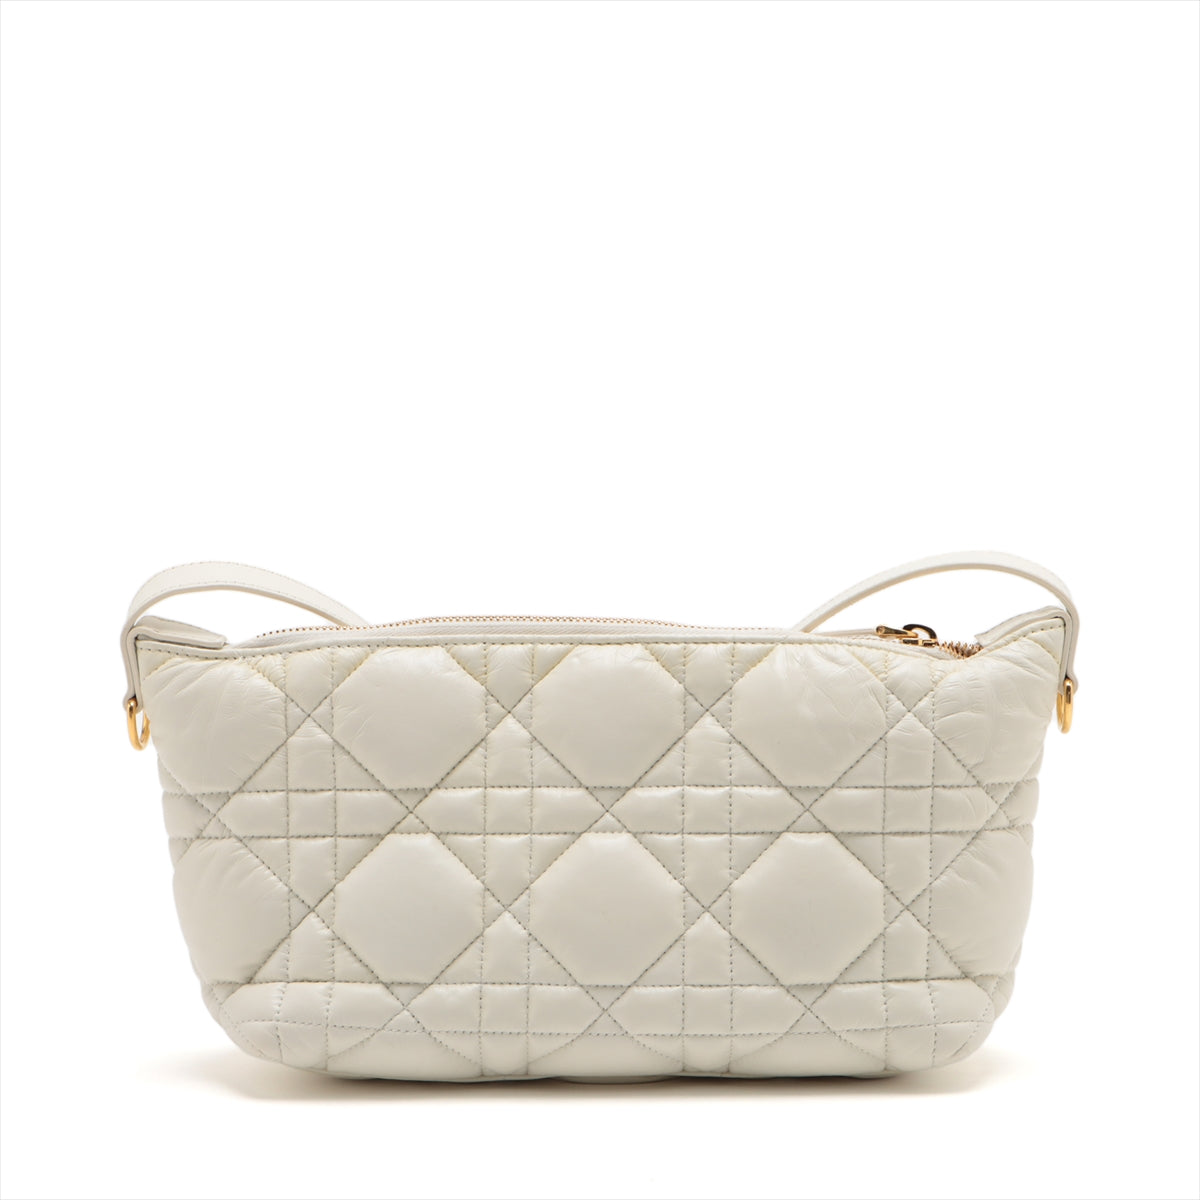 Dior Cannage nomad pouch Leather 2 Way Handbag White